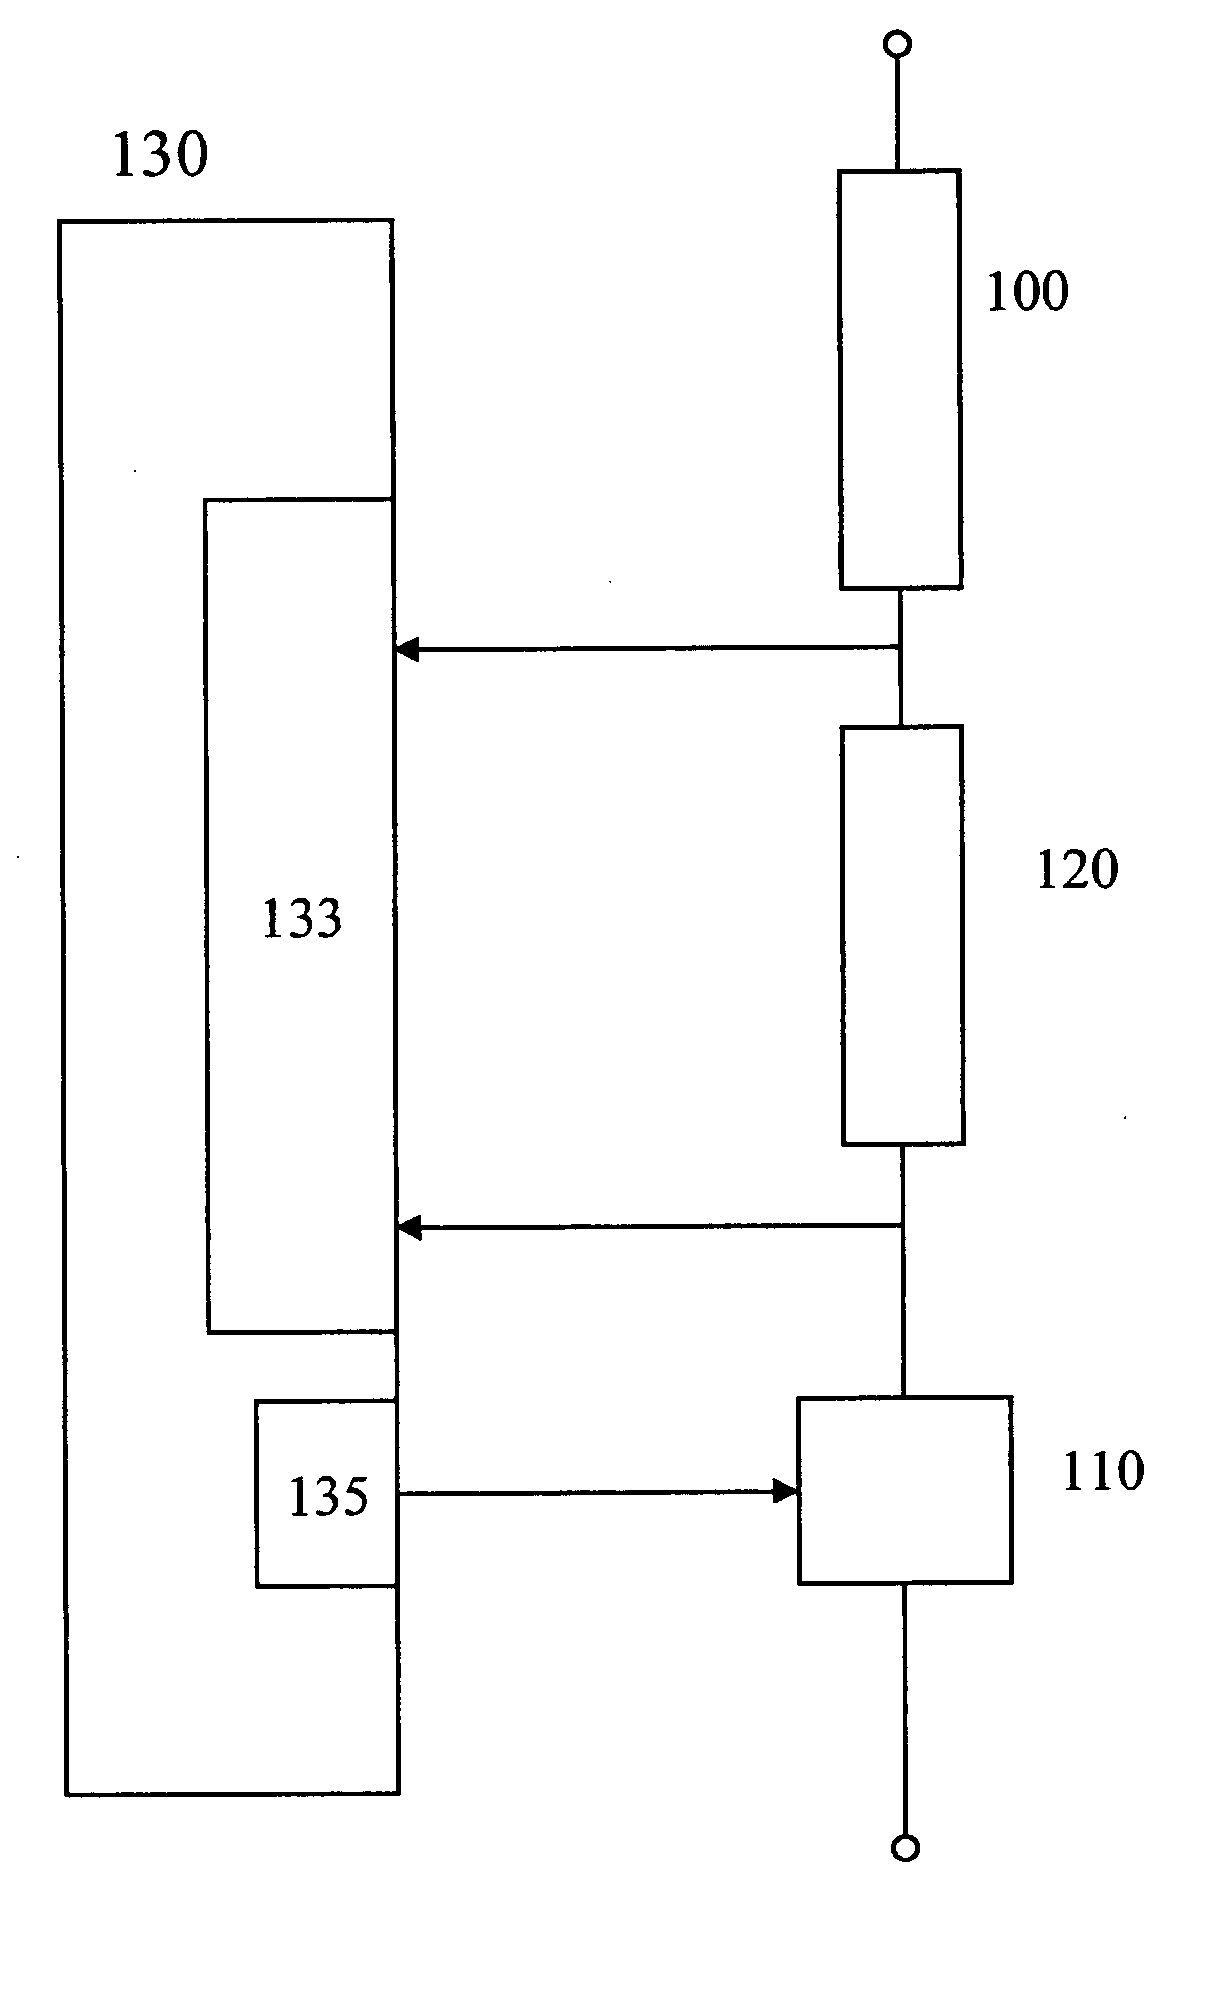 Method and Device for Controlling at Least One Glow Plug of a Motor Vehicle